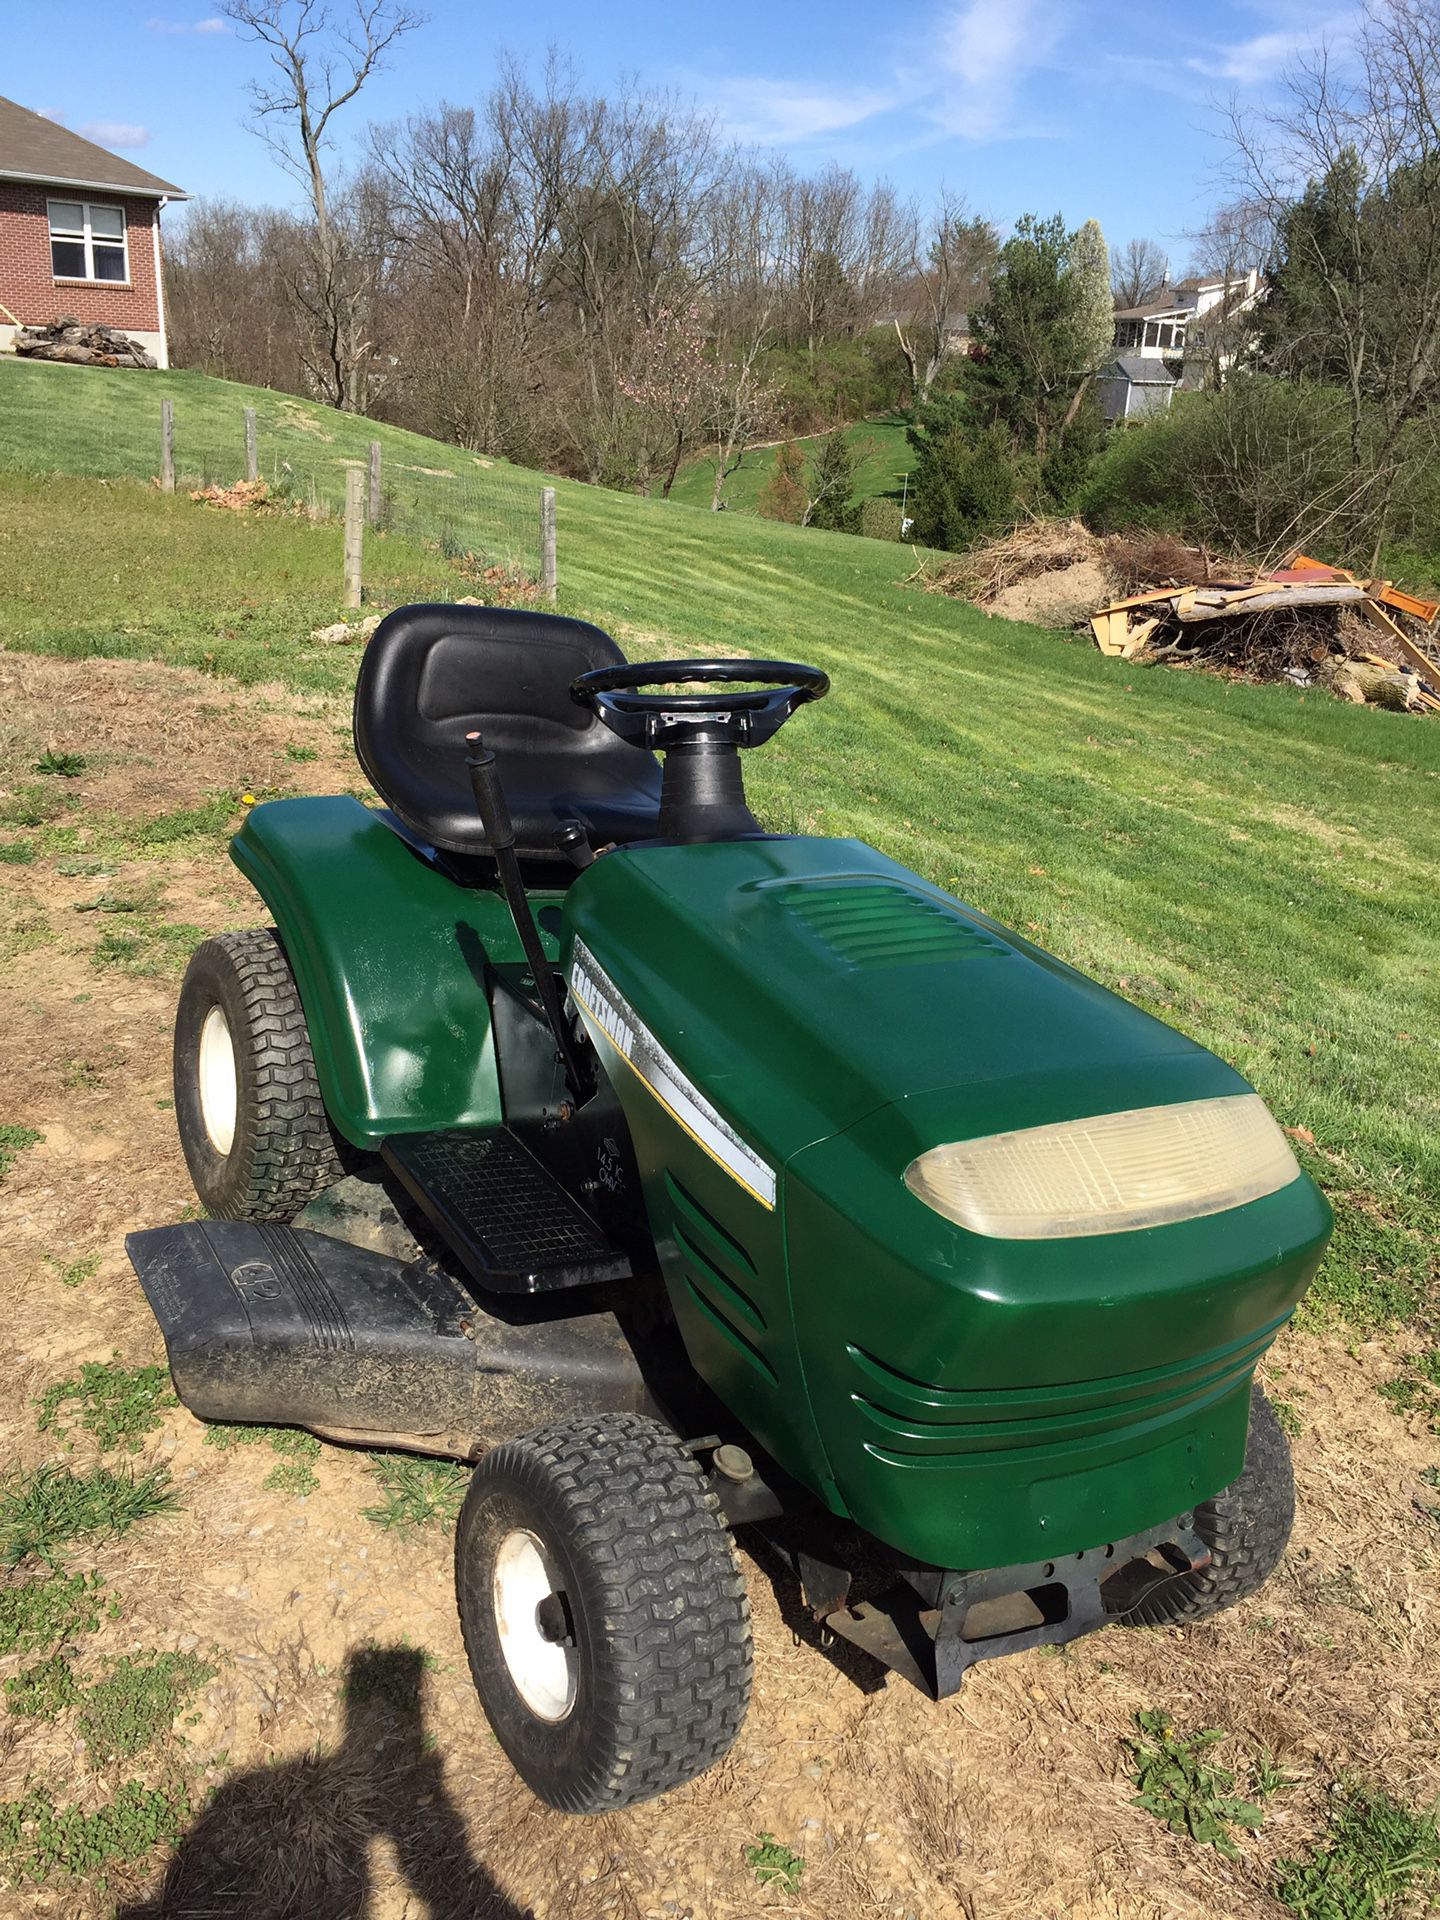 Craftsman Riding Mower 42” cut 14 1/2 hp engine - No delivery!